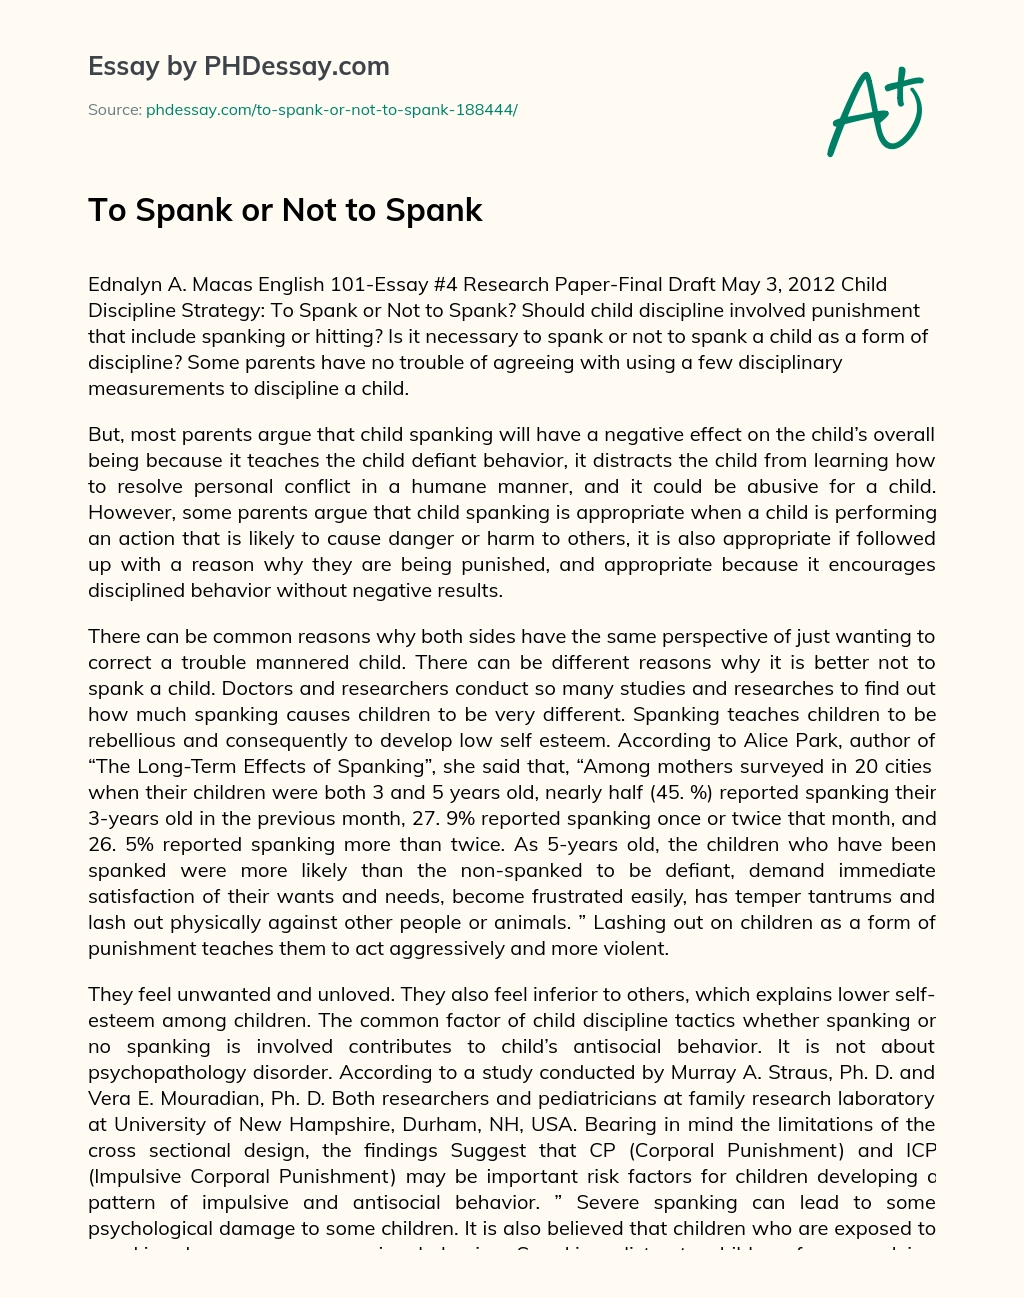 To Spank or Not to Spank essay